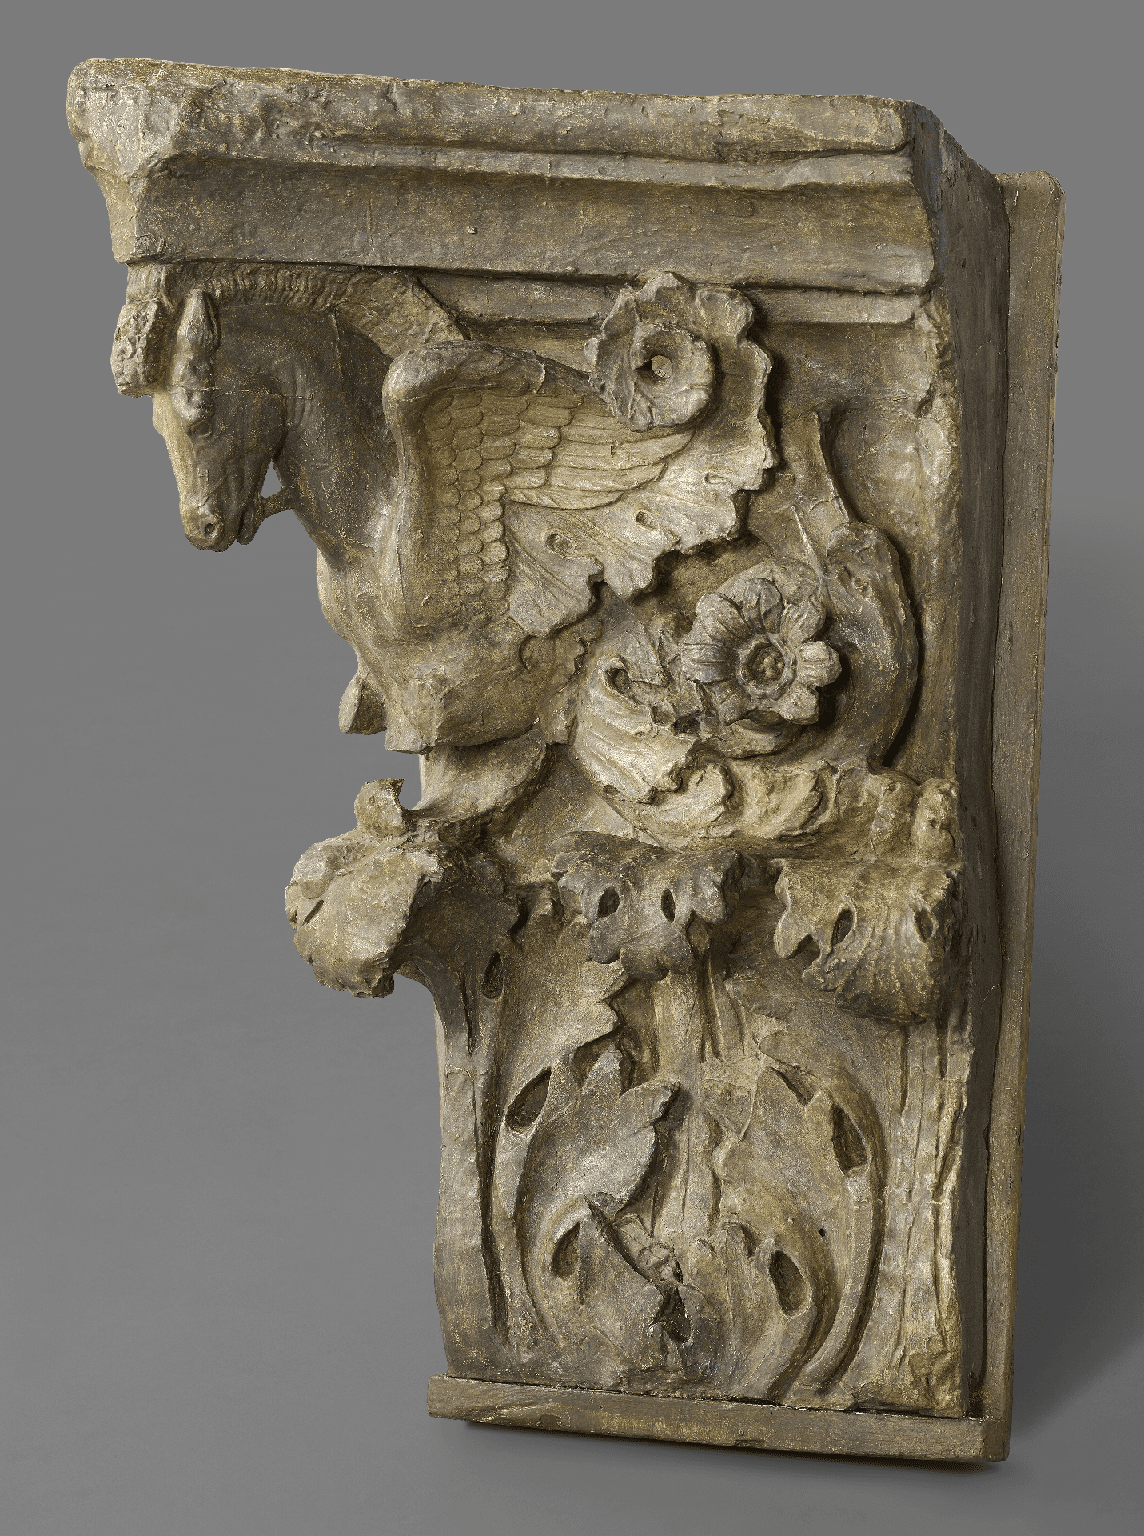 A cast of a Corinthian pilaster capital with Pegasus volutes (spiral scrolls) from the Forum of Augustus in Rome, late 18th century or early 19th century. Plaster cast. Height: 36 inches, Width: 25 inches. The original is in the Museum at Trajan’s Markets, Rome. (Royal Academy of Arts, London)